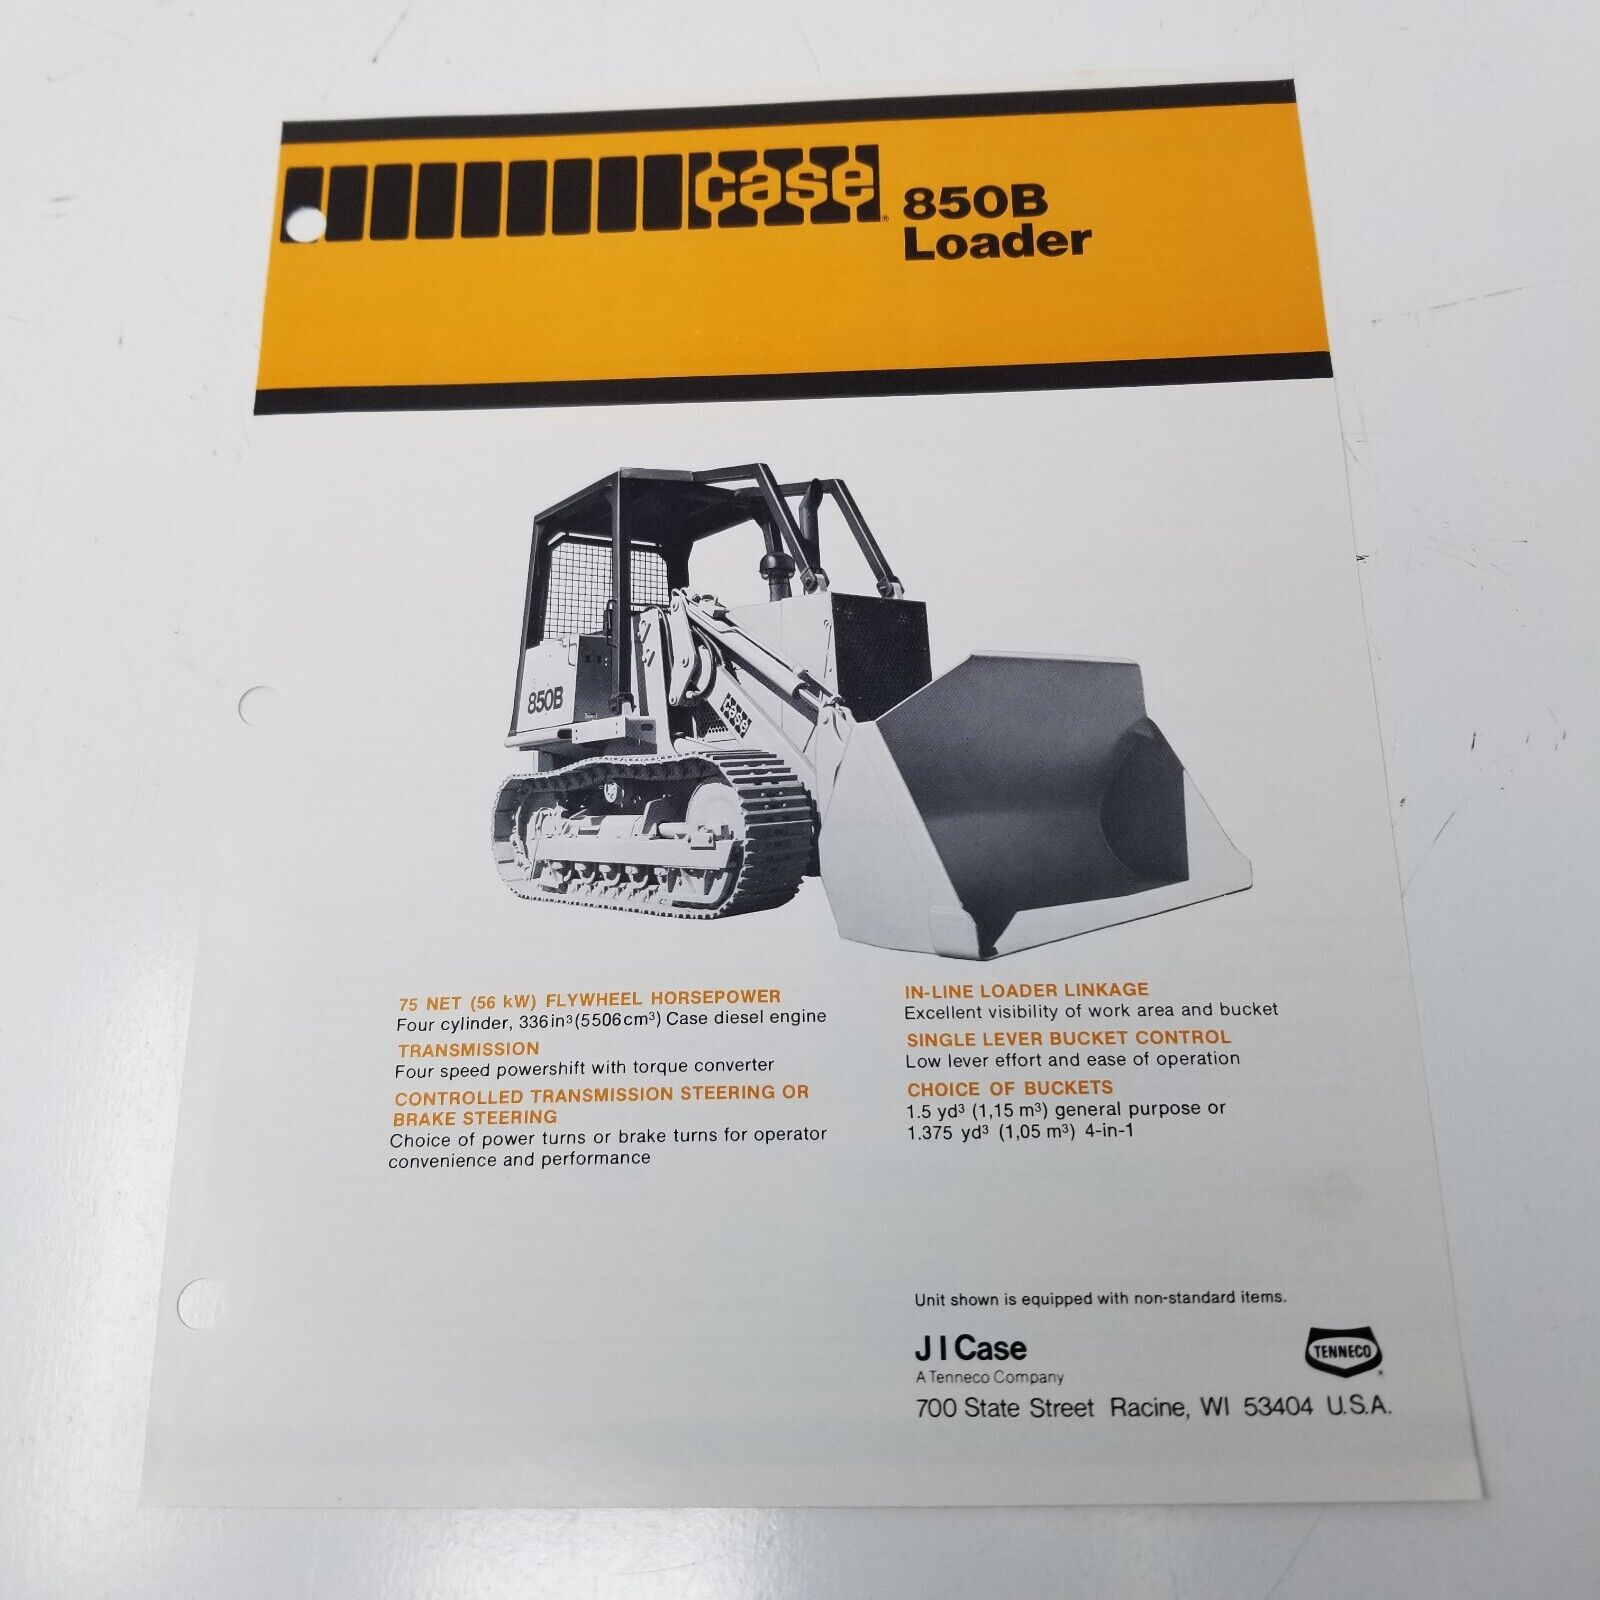 Case 850B Loader Sales Brochure 1980 Specifications Photos Accessories